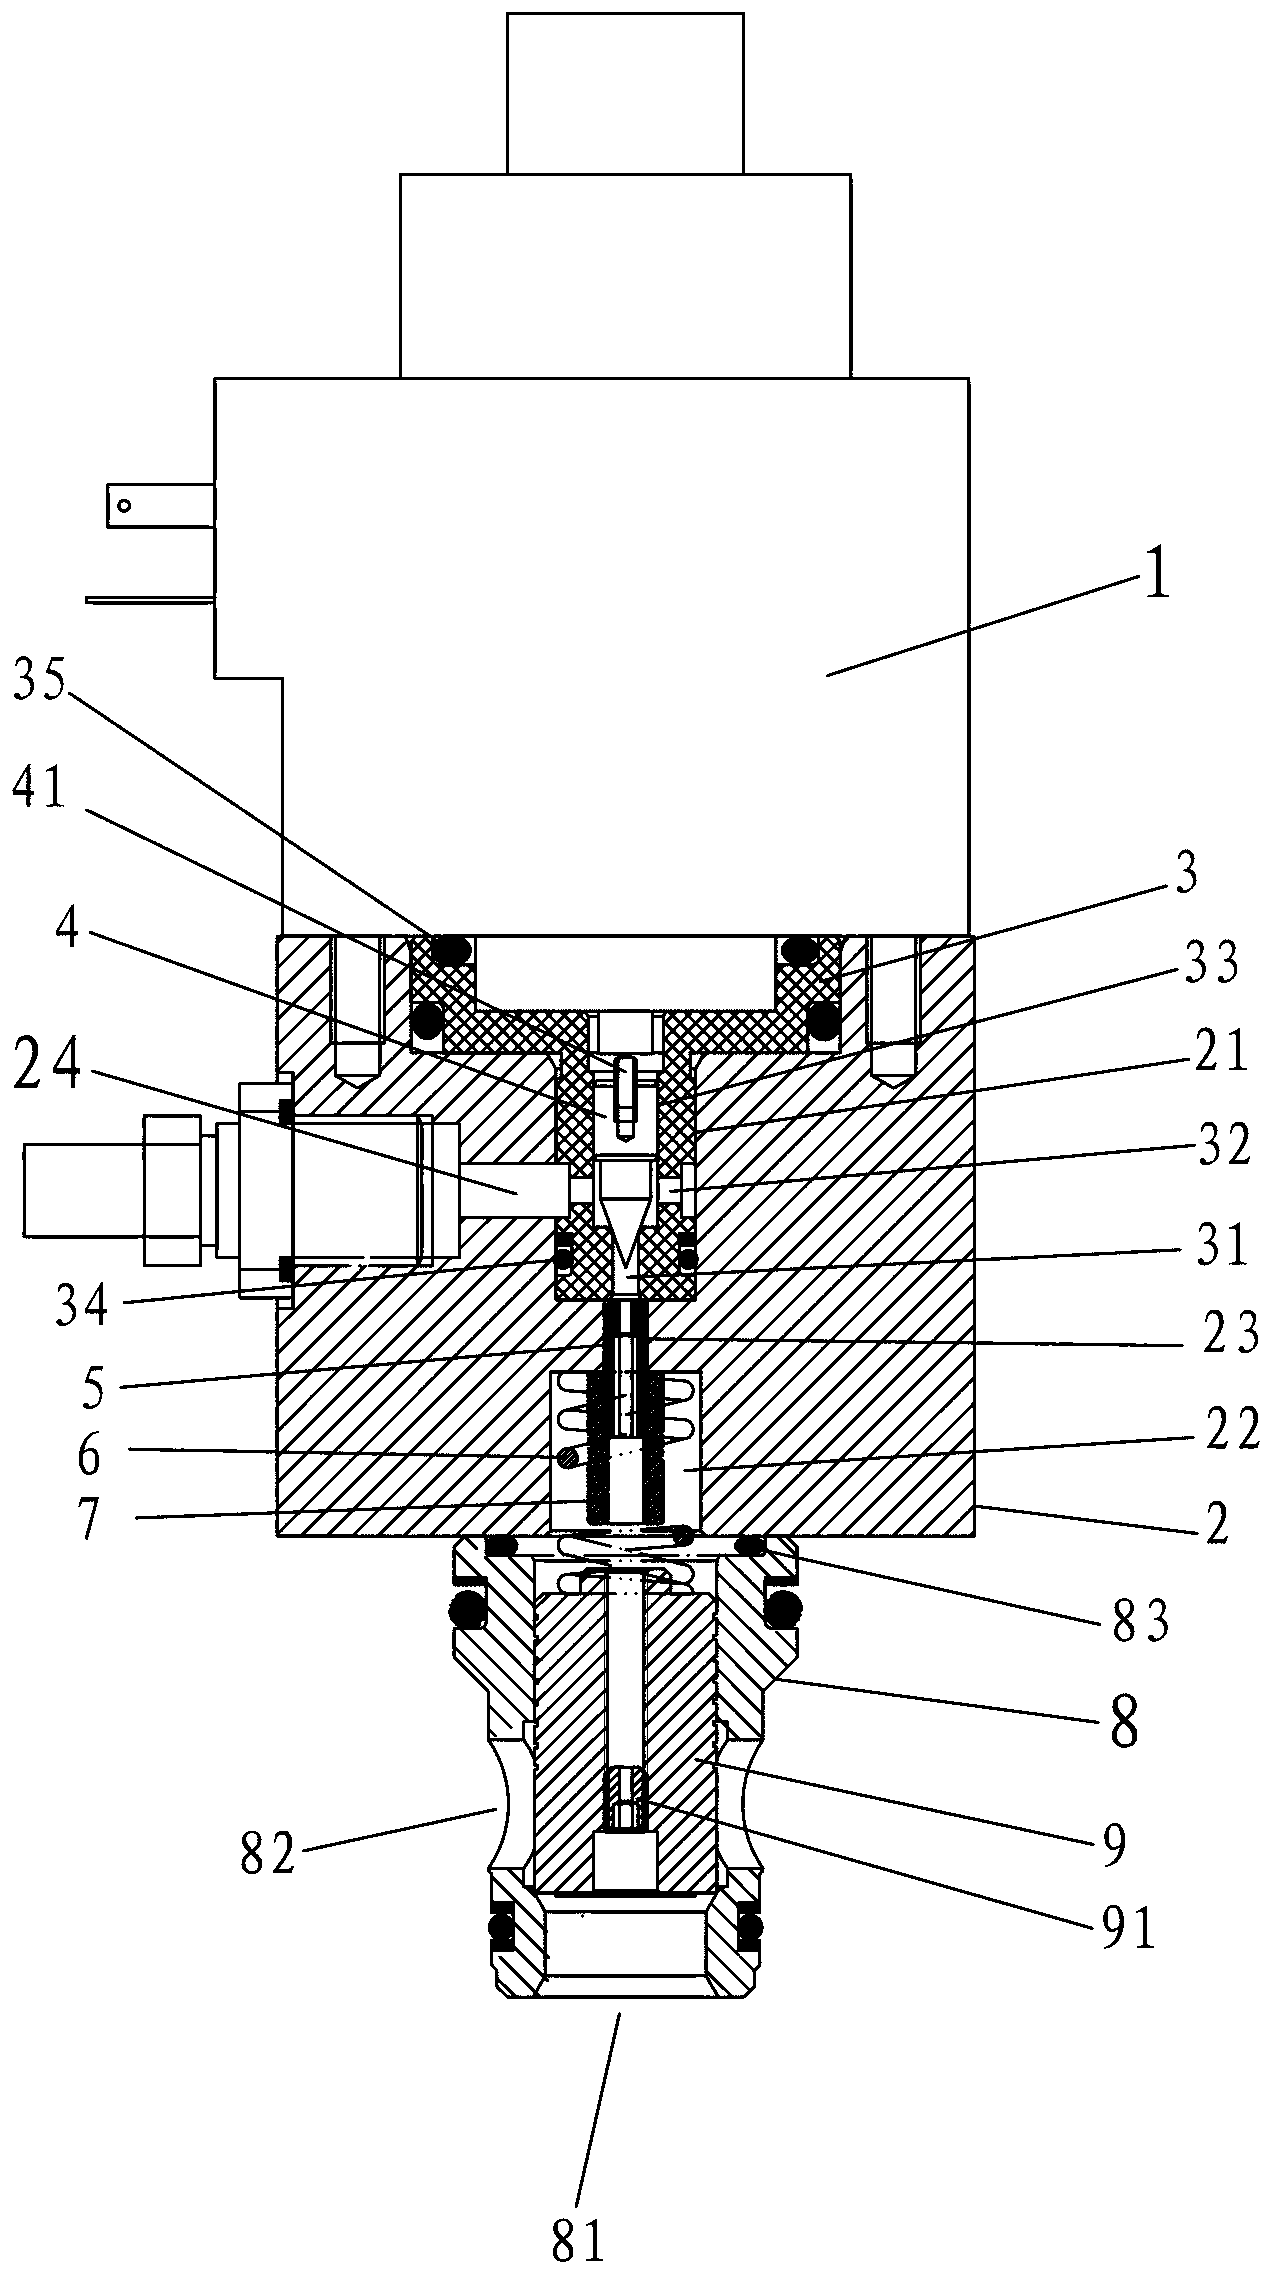 Insertion-structure-based pilot-operated electric-hydraulic proportional spill valve